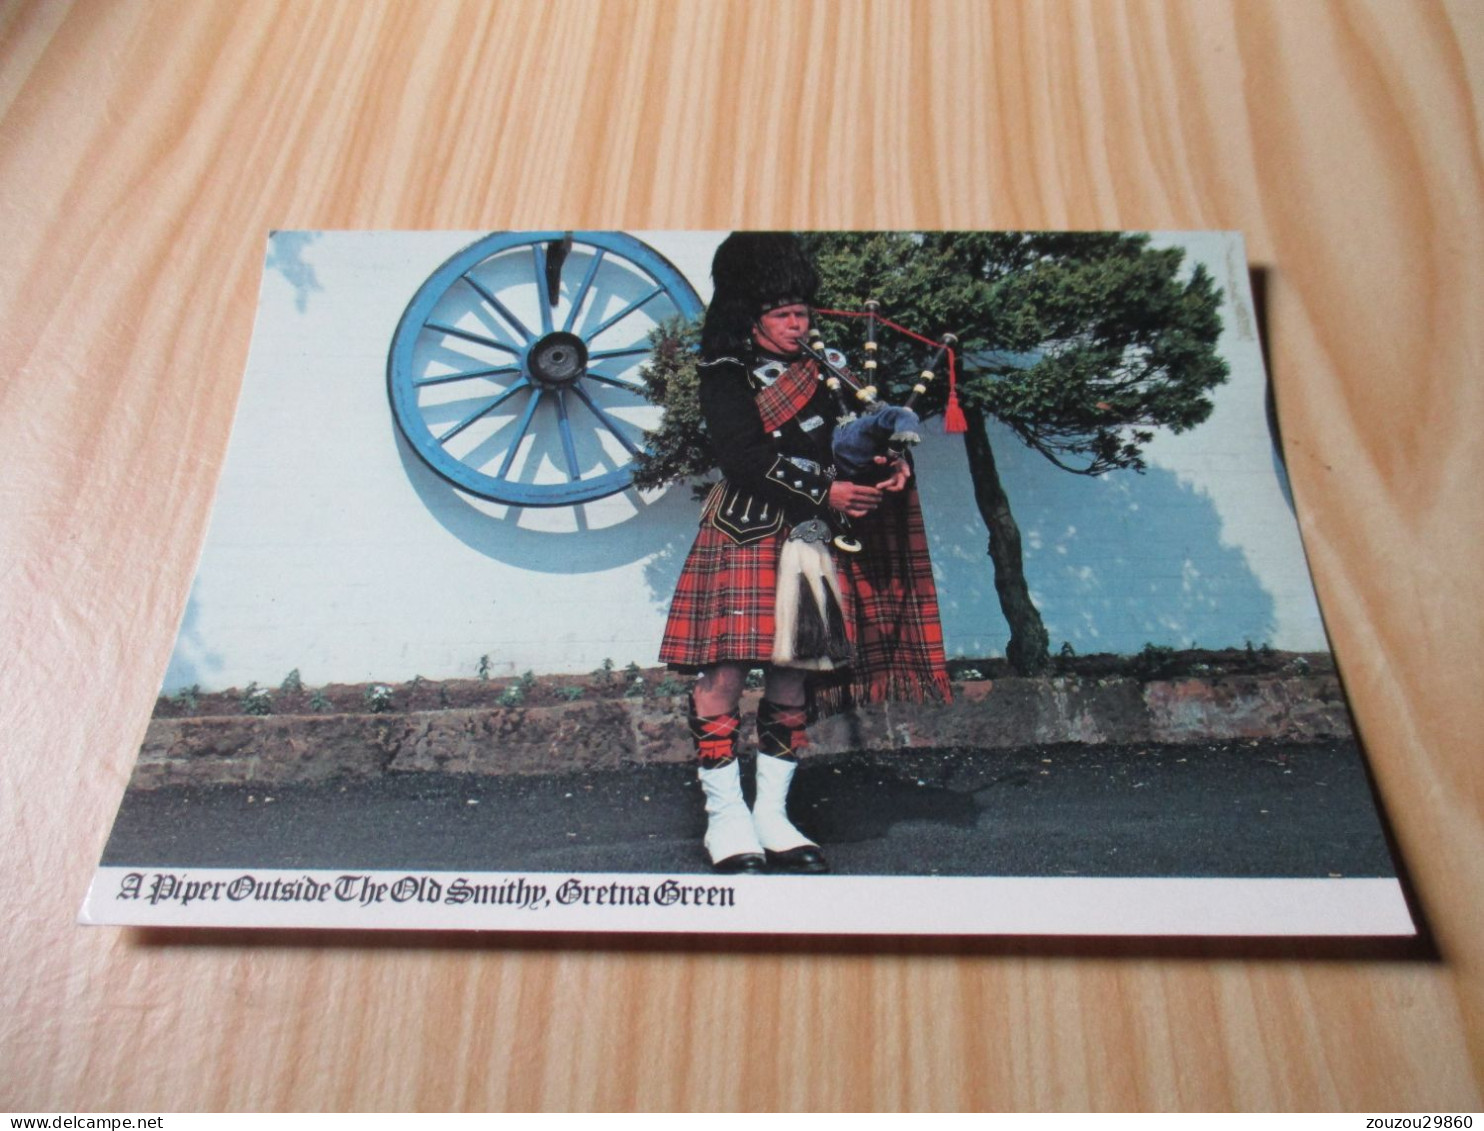 Gretna Green (Royaume-Uni).A Piper Outside The Old Smithy. - Dumfriesshire